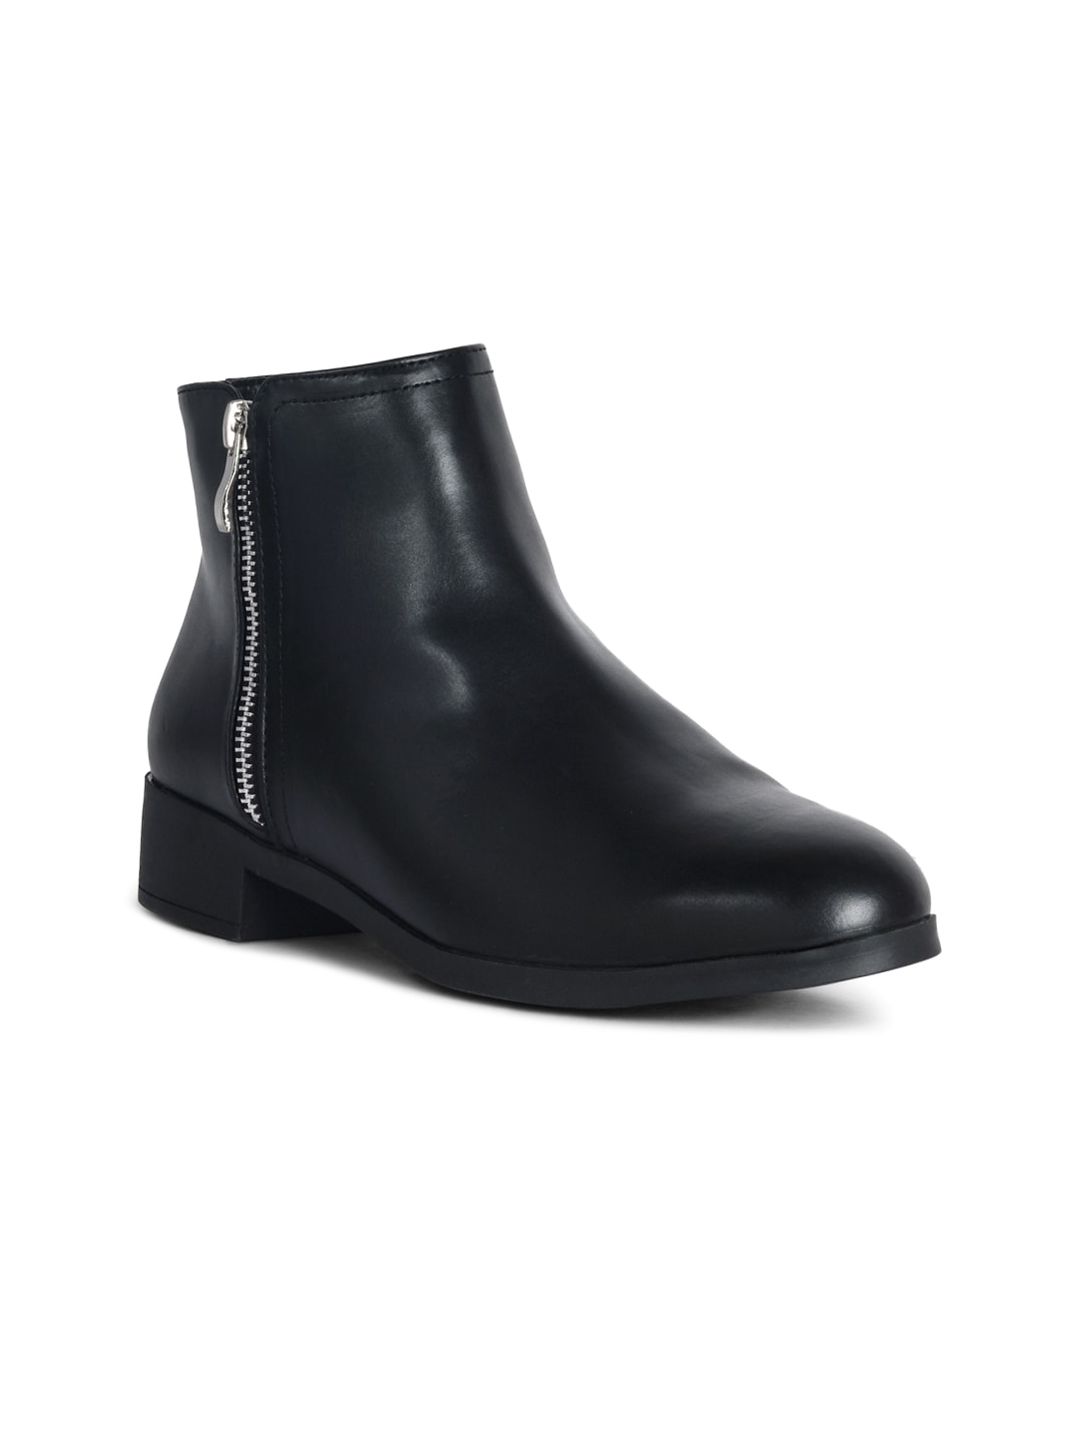 London Rag Women Black Solid Mid-Top Boots Price in India